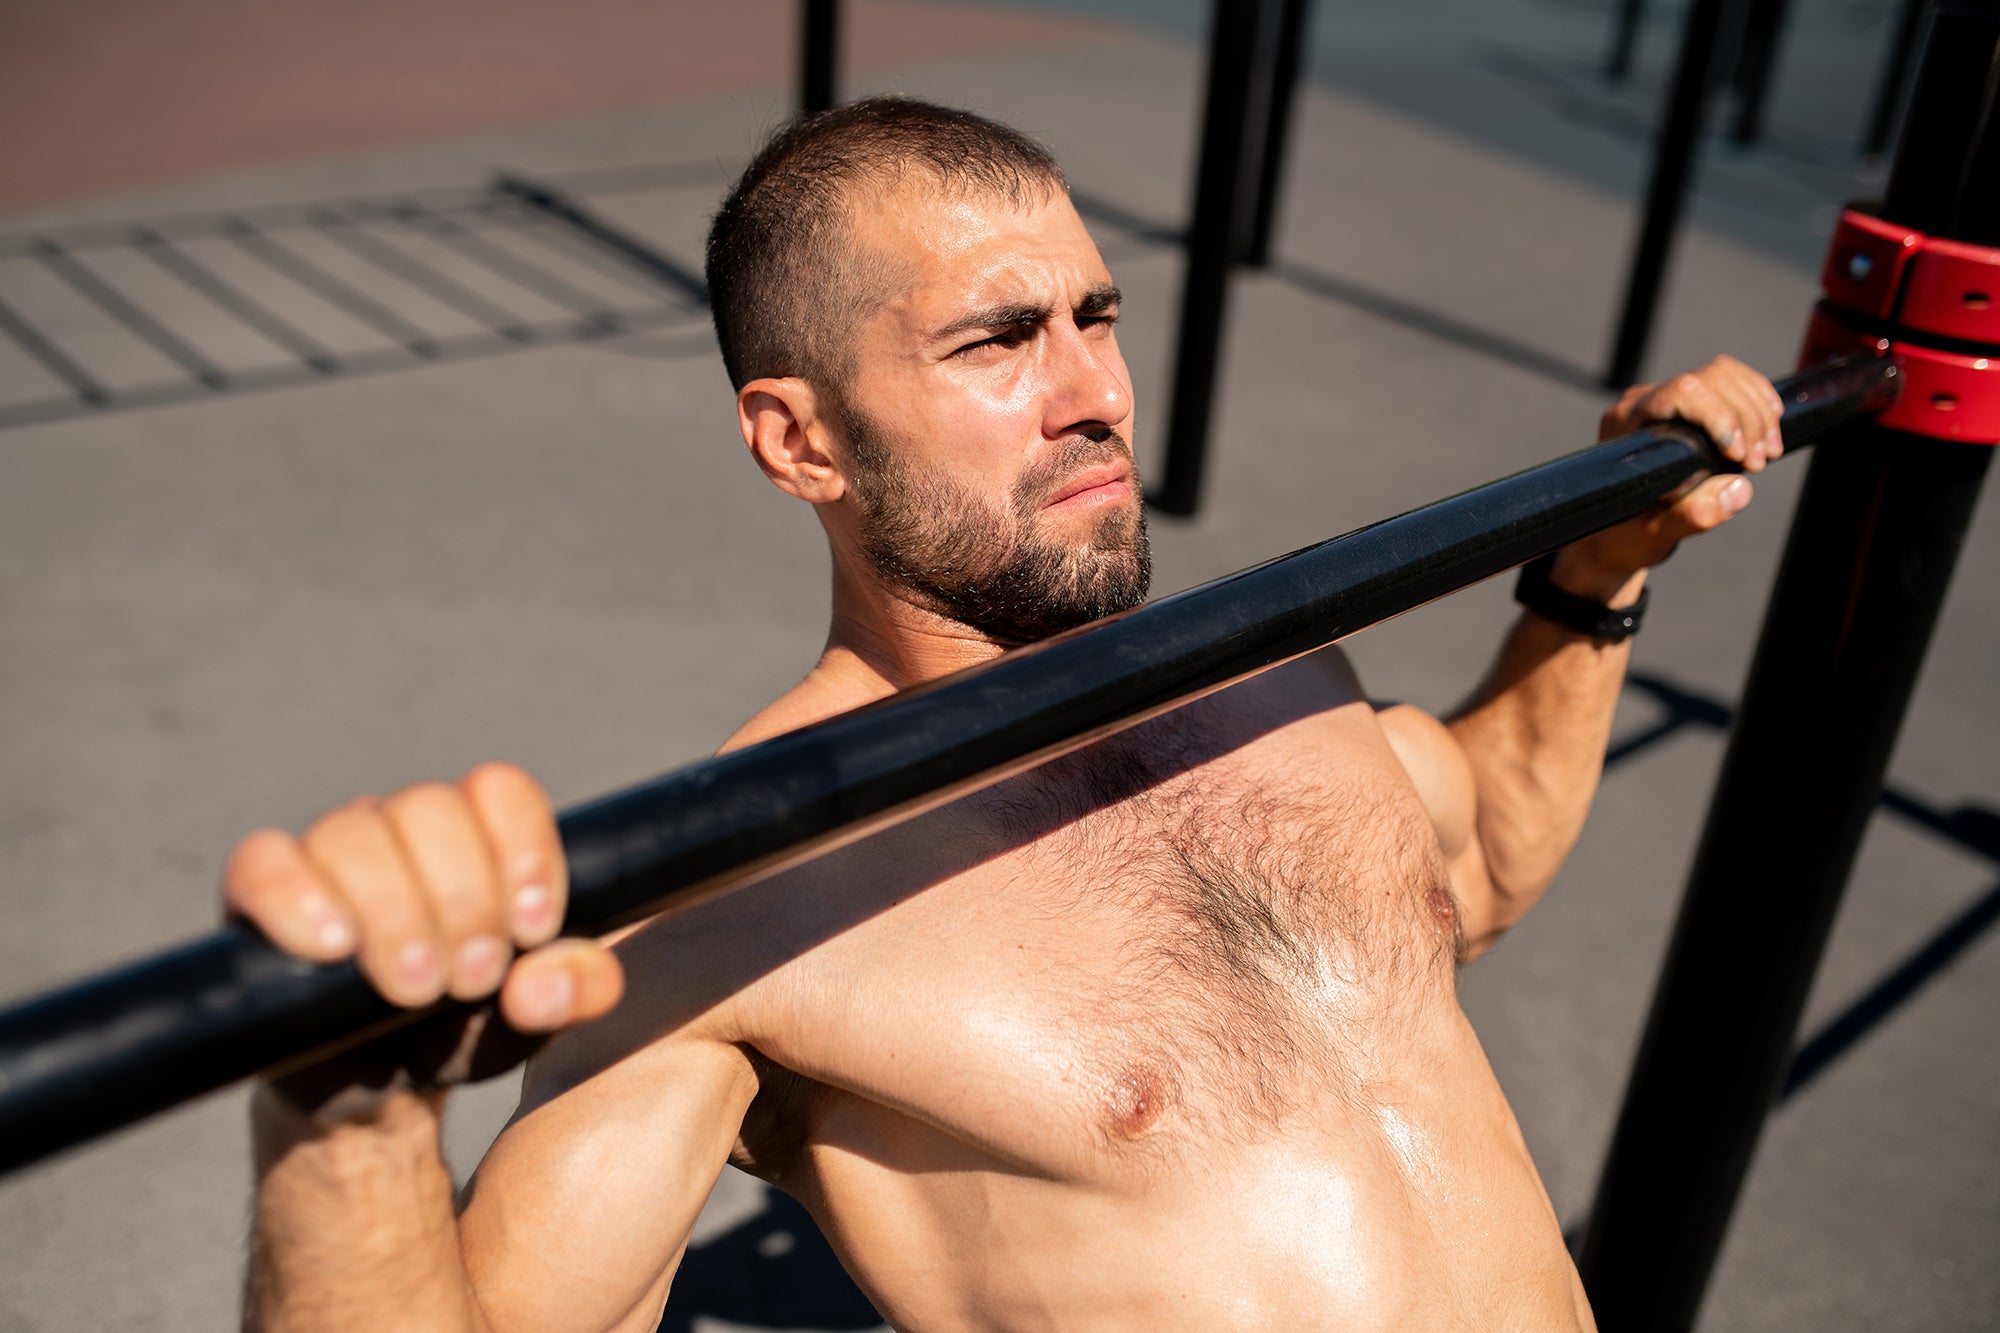 How To Build True Functional Fitness